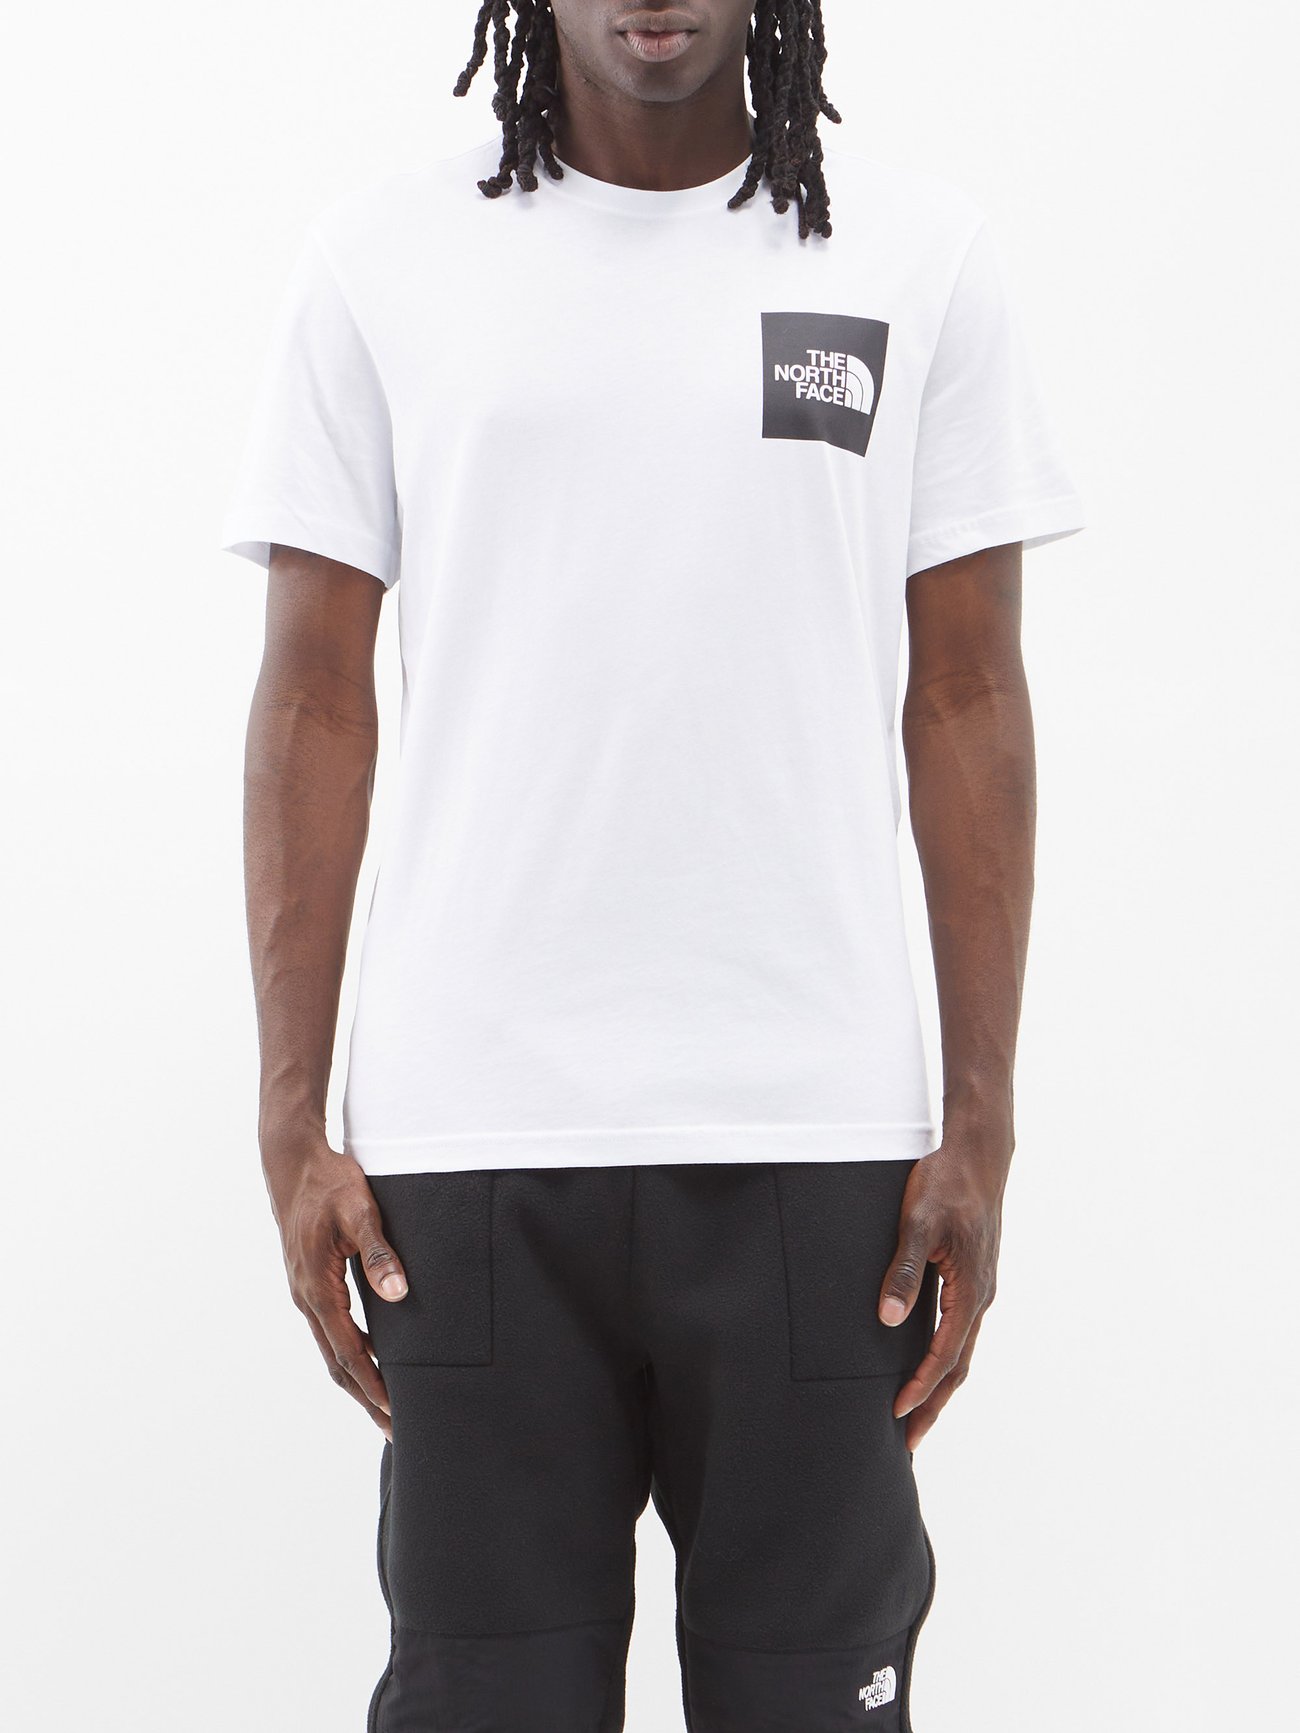 Ongrijpbaar vod chocola White Logo-patch cotton-jersey T-shirt | The North Face | MATCHESFASHION US